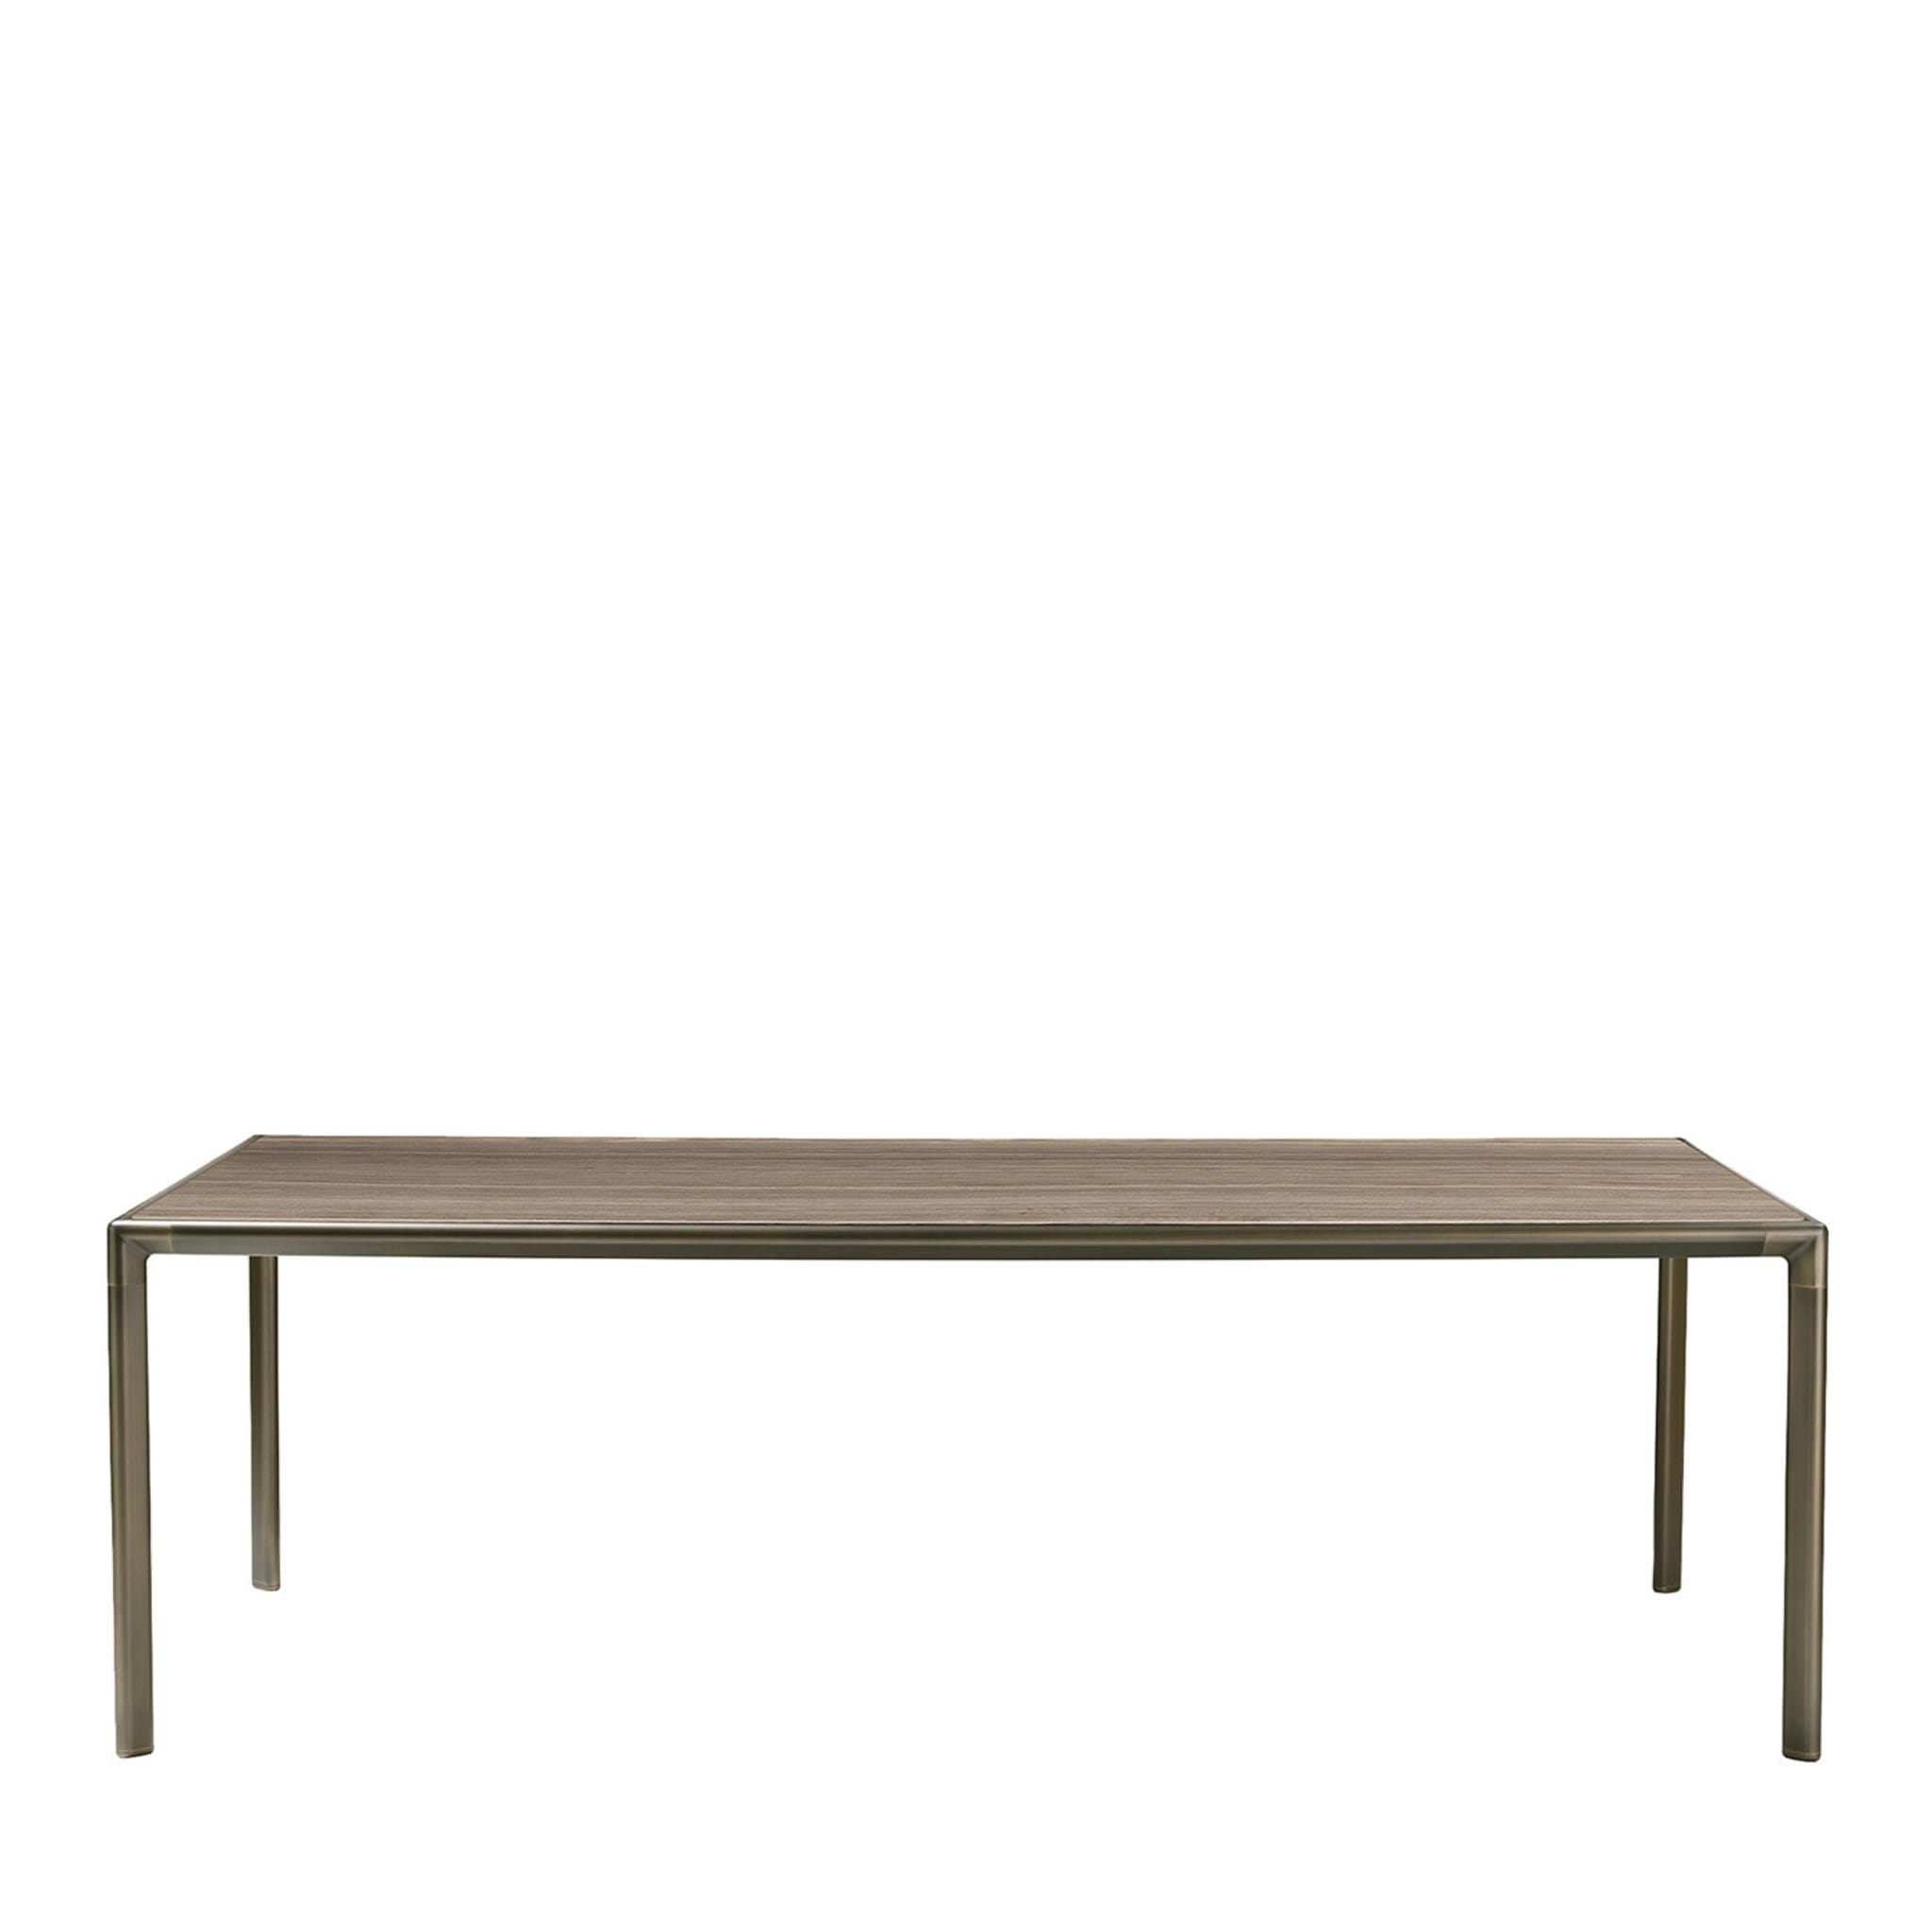 Frame Eramosa Marble Dining Table - Main view